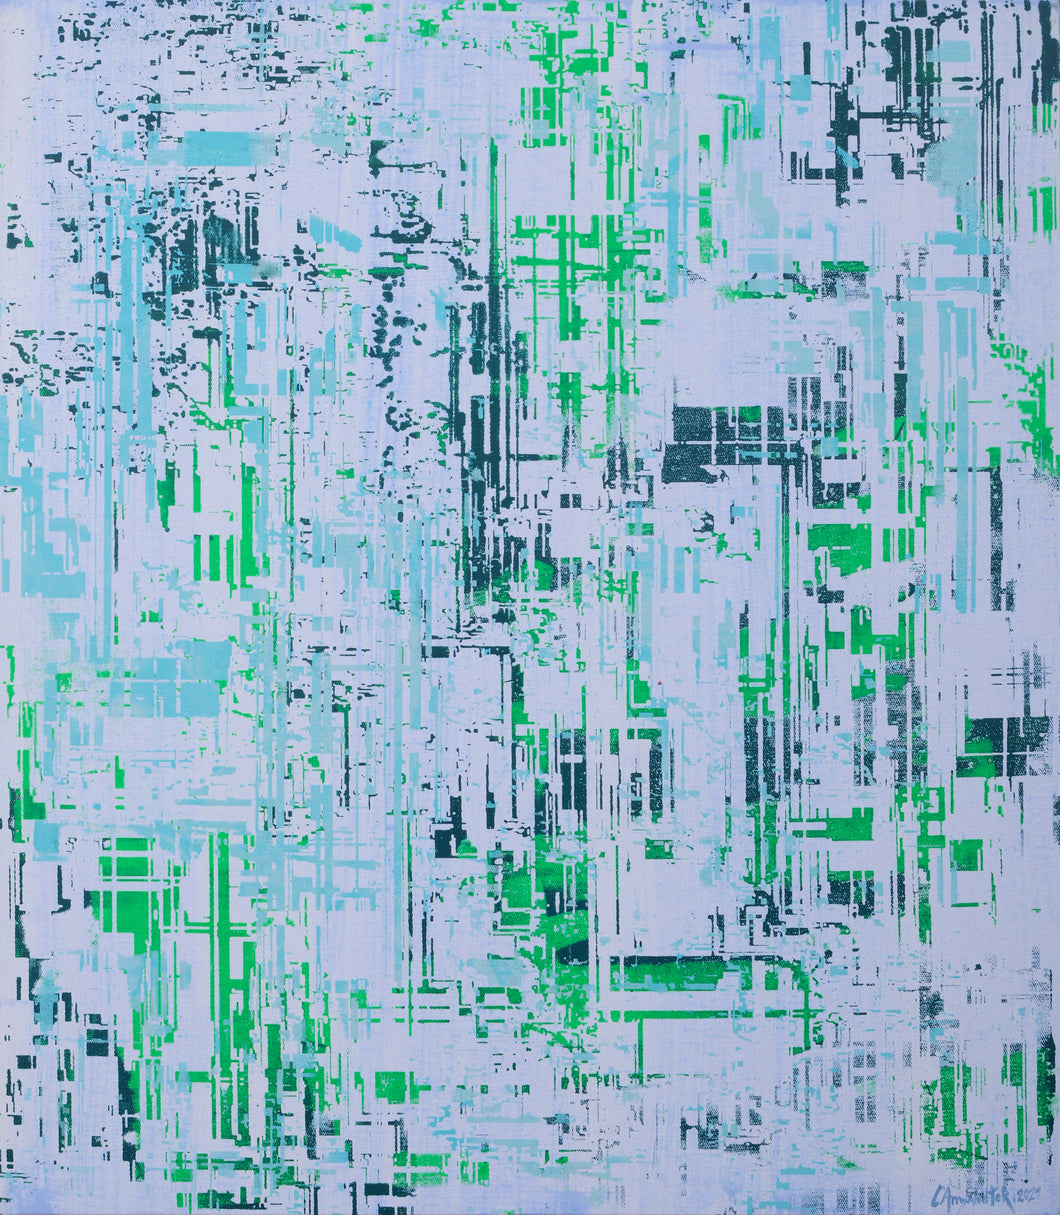 Reverb and Phase Shift  | Cristobal Anwandter | Painting